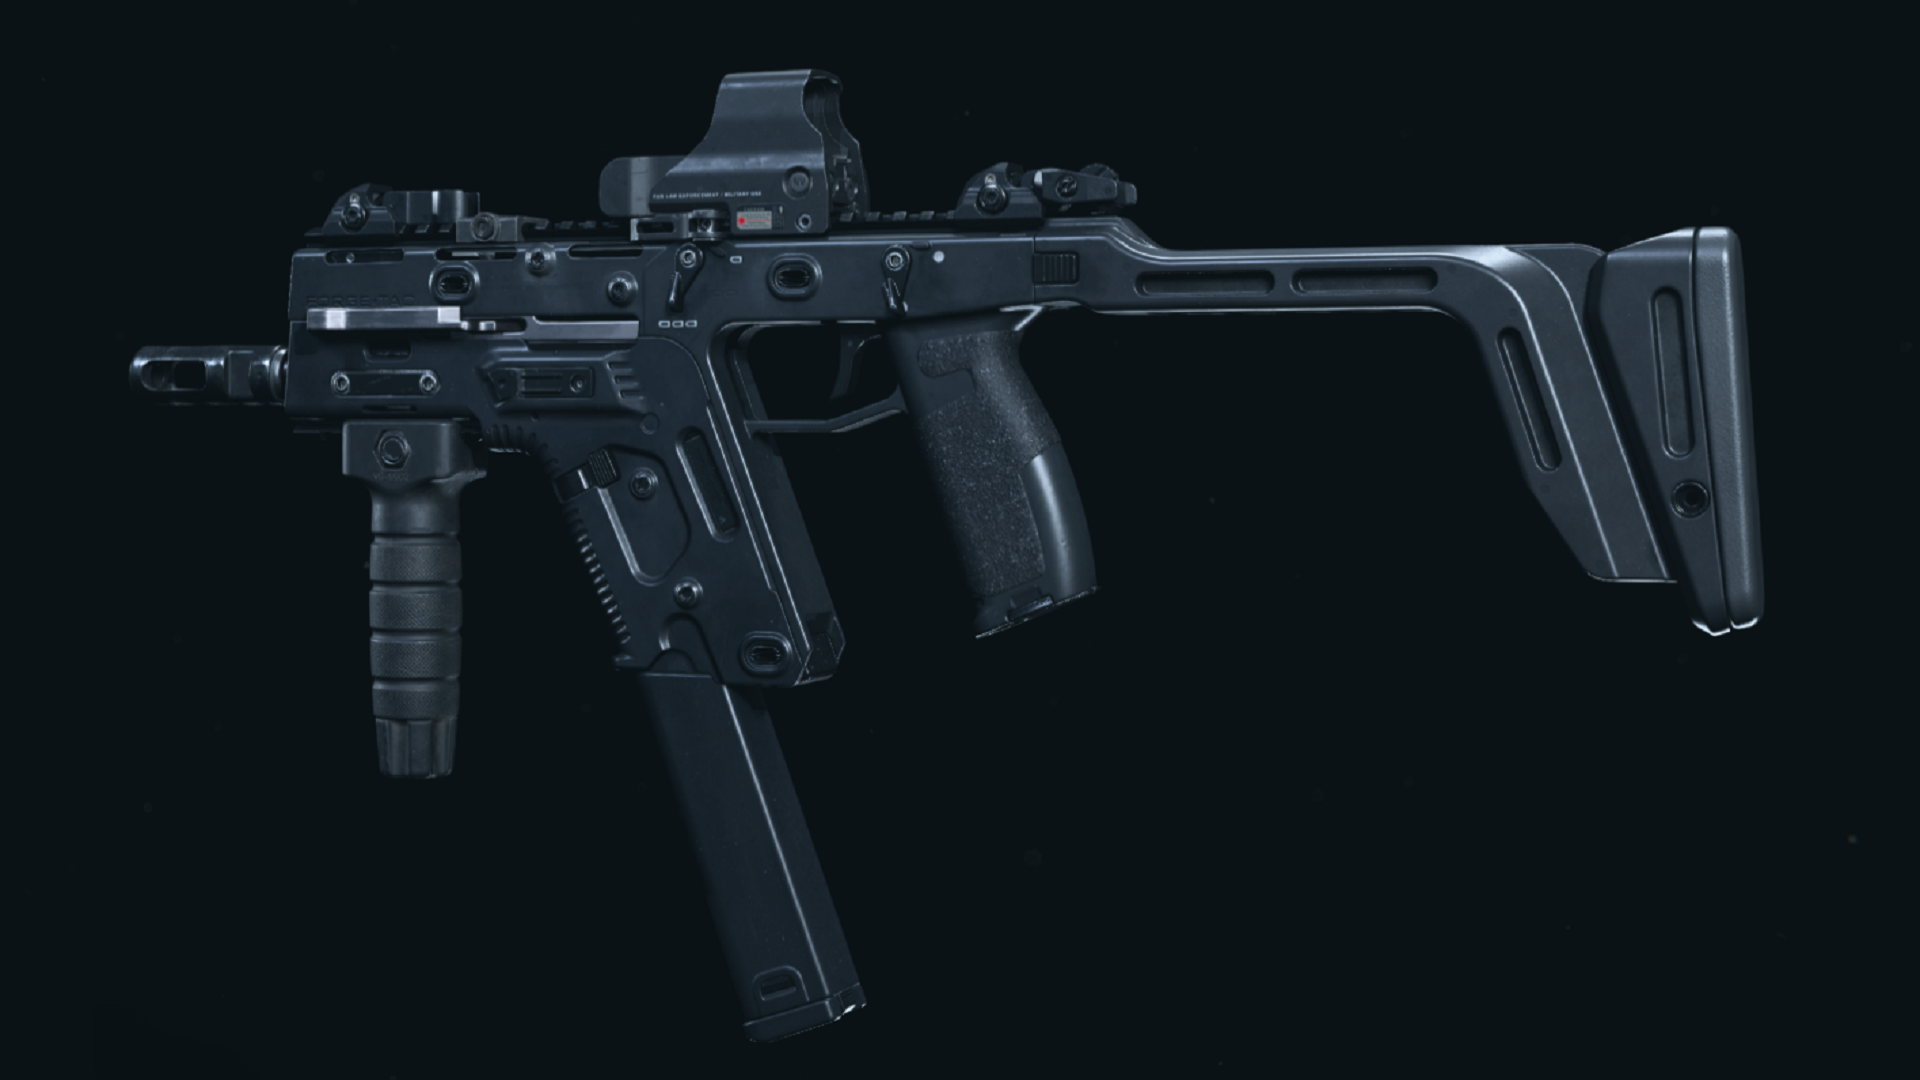 The Fennec SMG in Call of Duty: Warzone